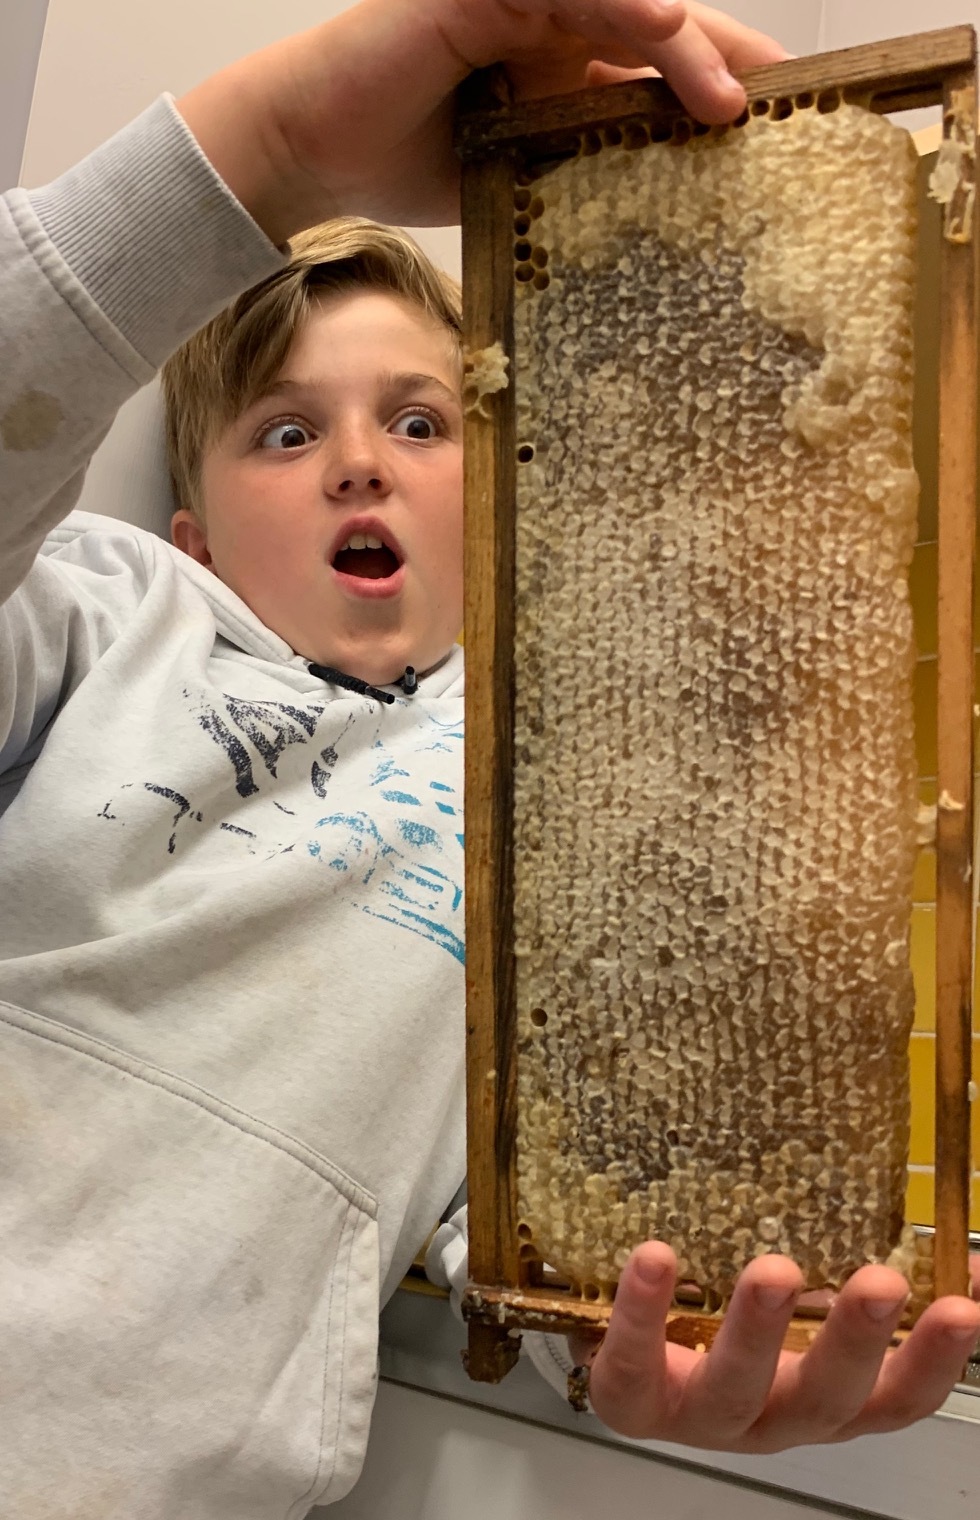 Elliot and his bees